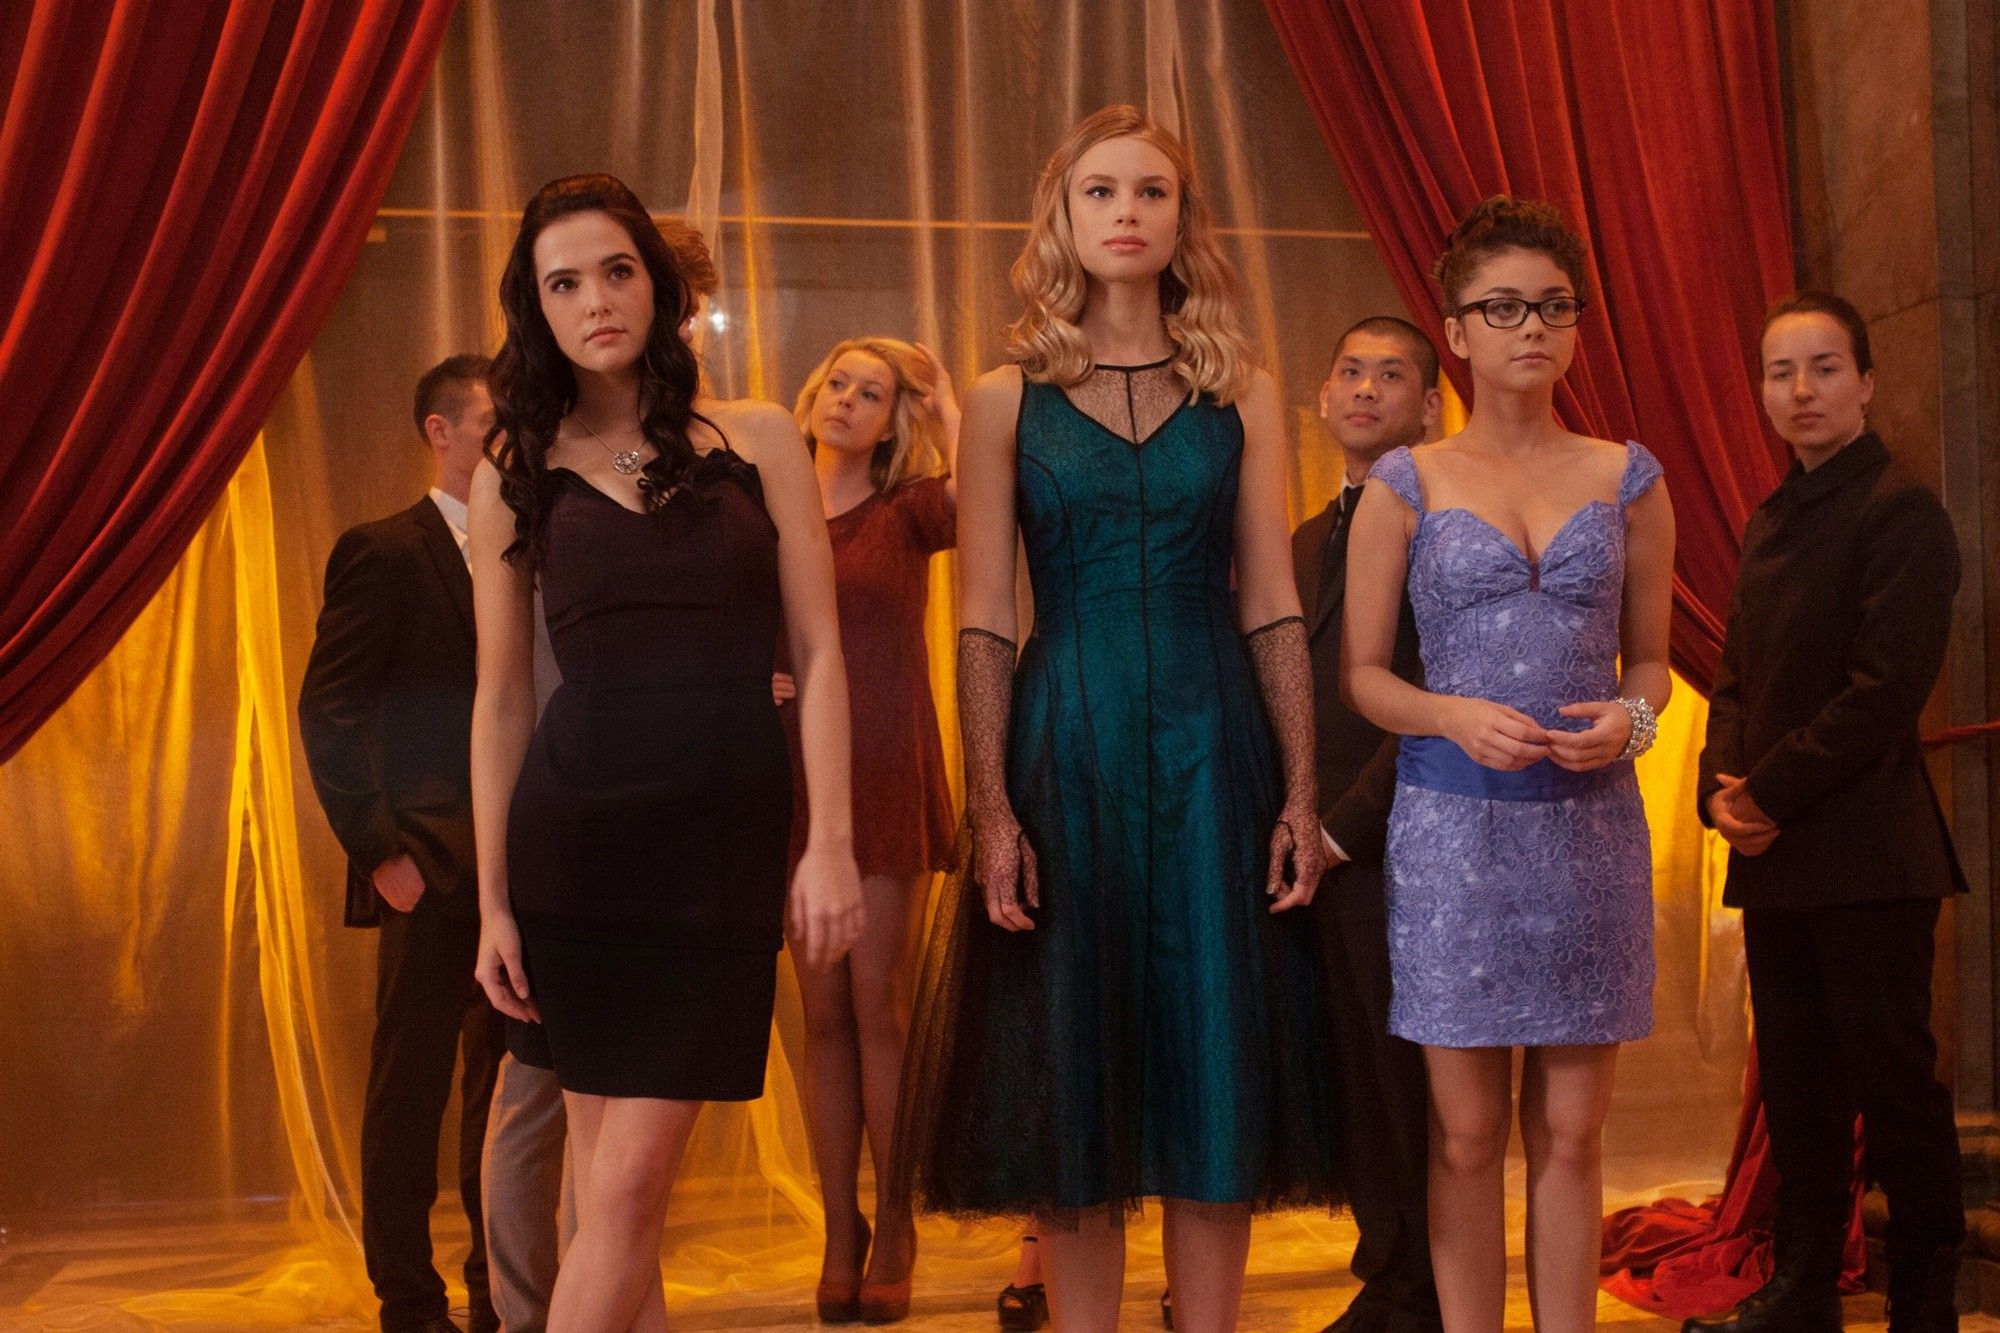 Sami Gayle, Lucy Fry and Sarah Hyland in The Weinstein Company's Vampire Academy (2014)